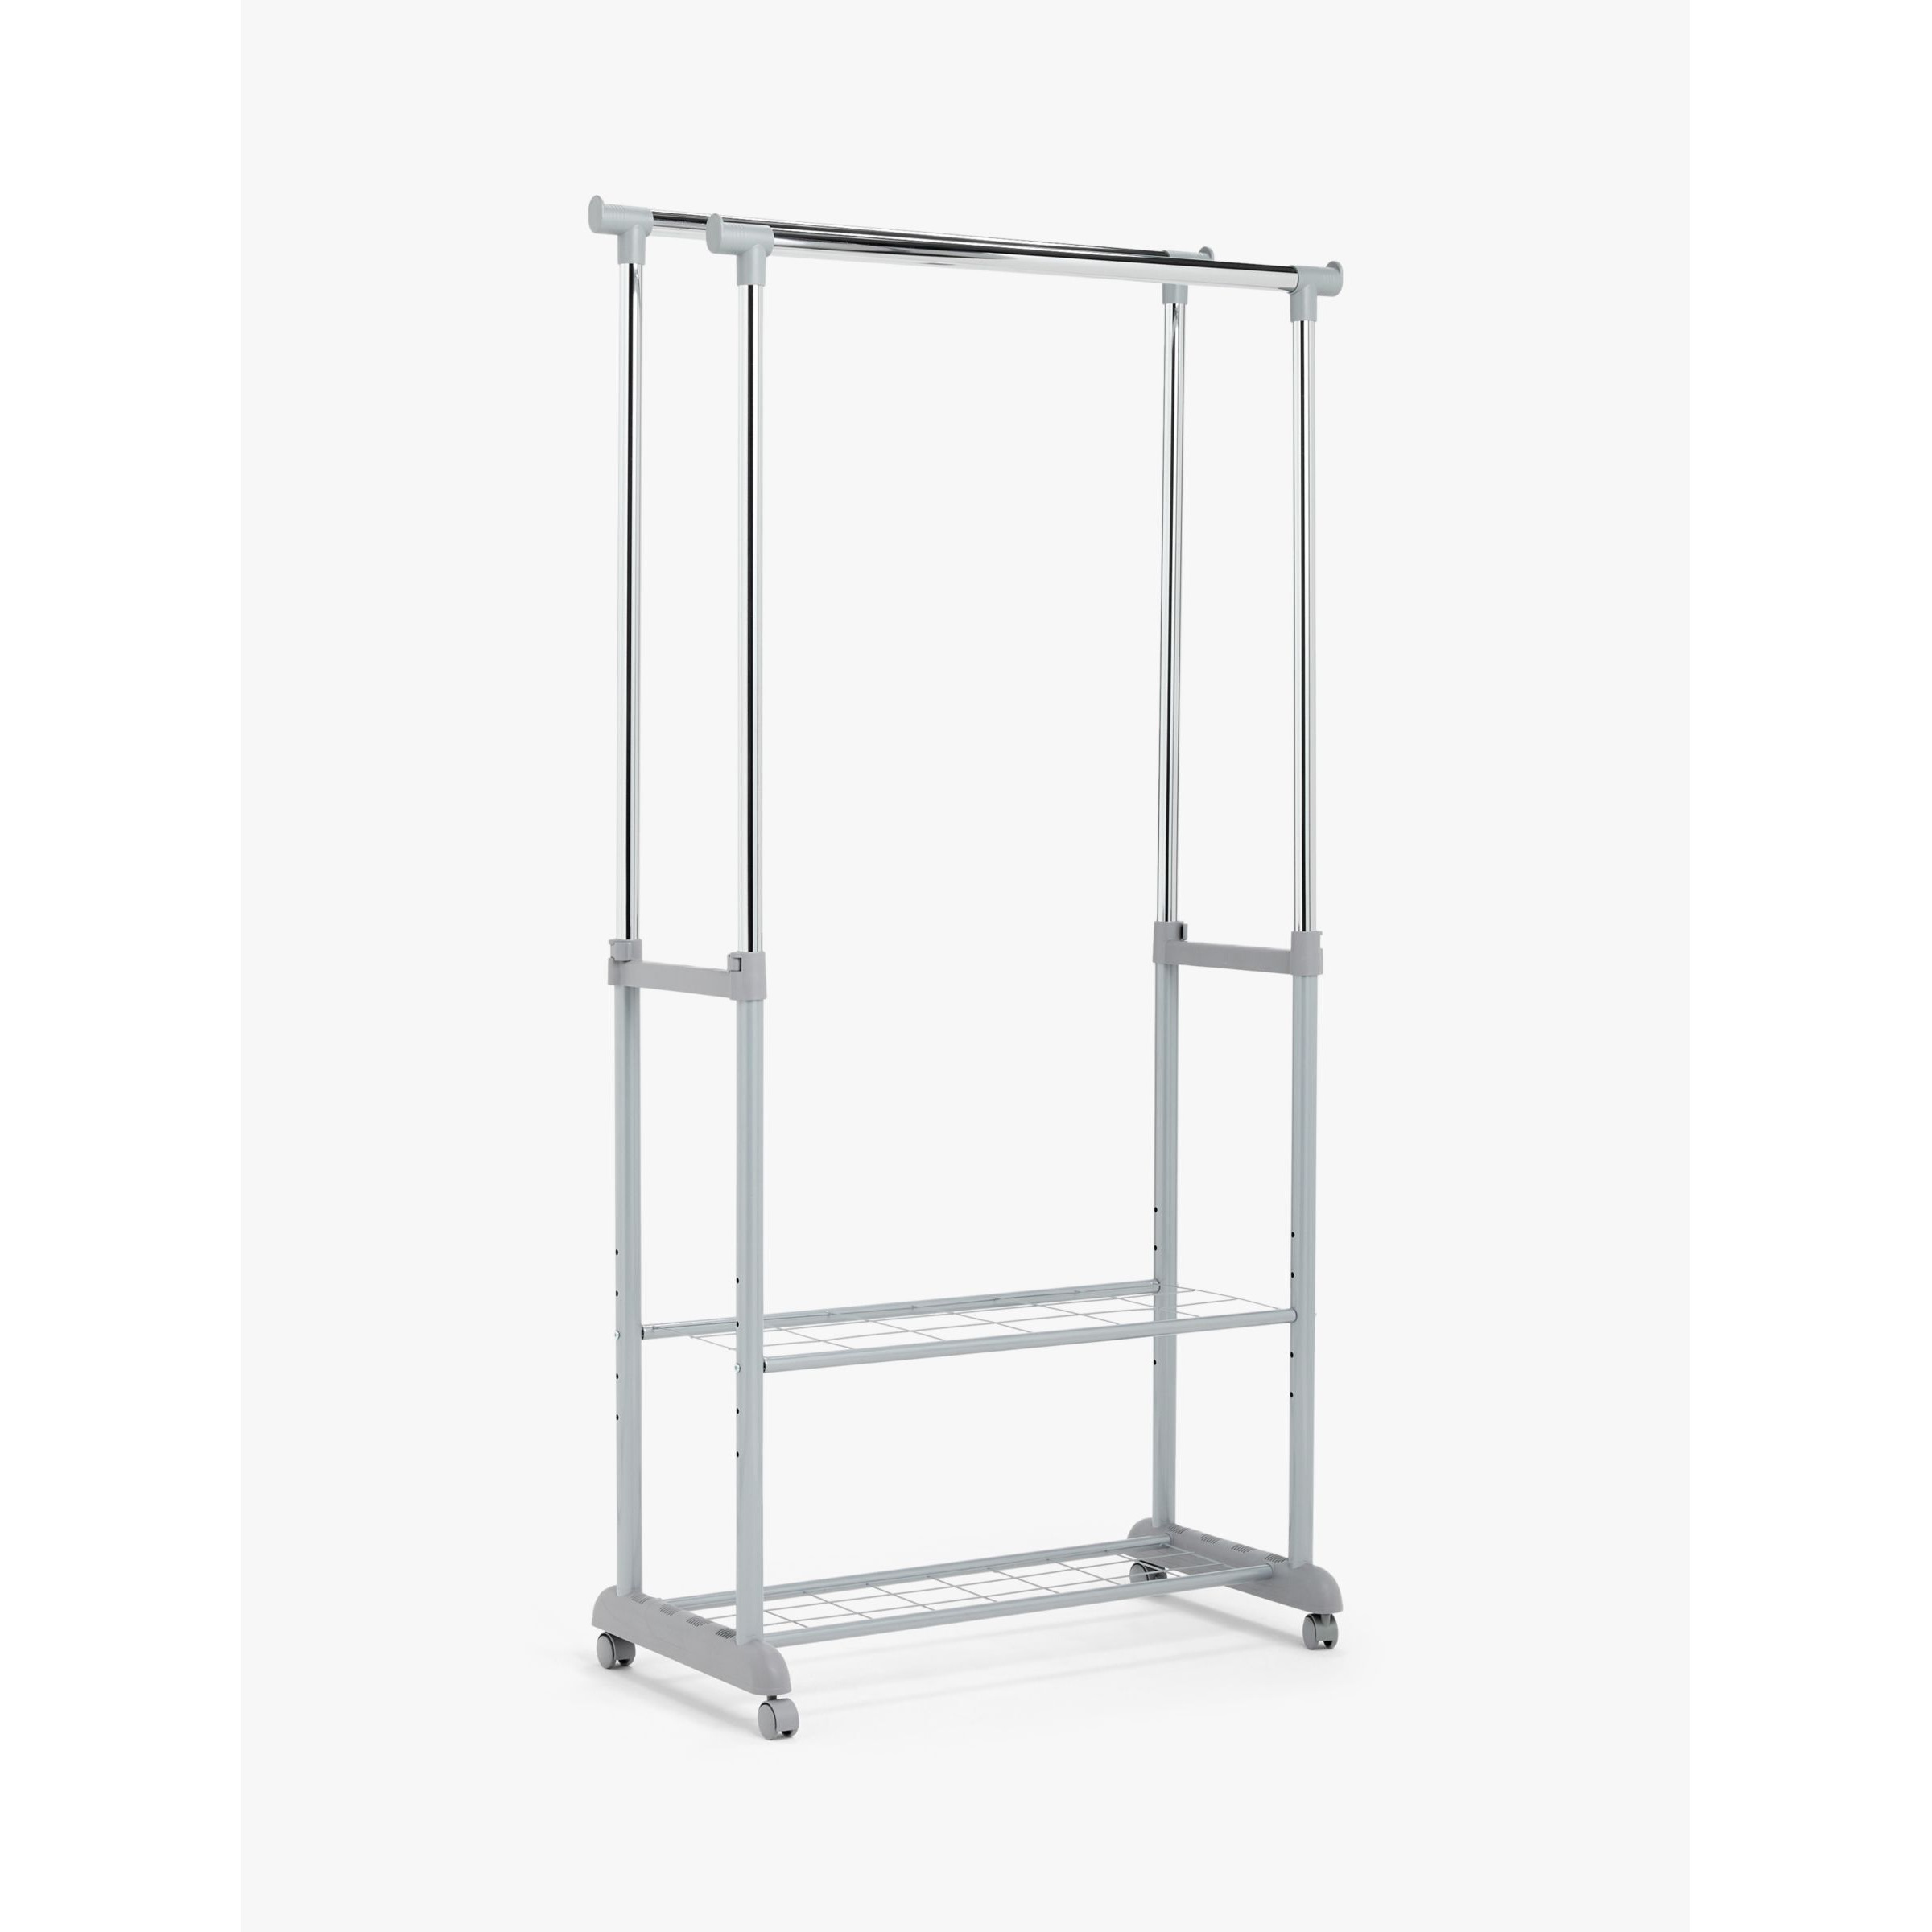 John Lewis ANYDAY Double Height Adjustable Clothes Rail - image 1